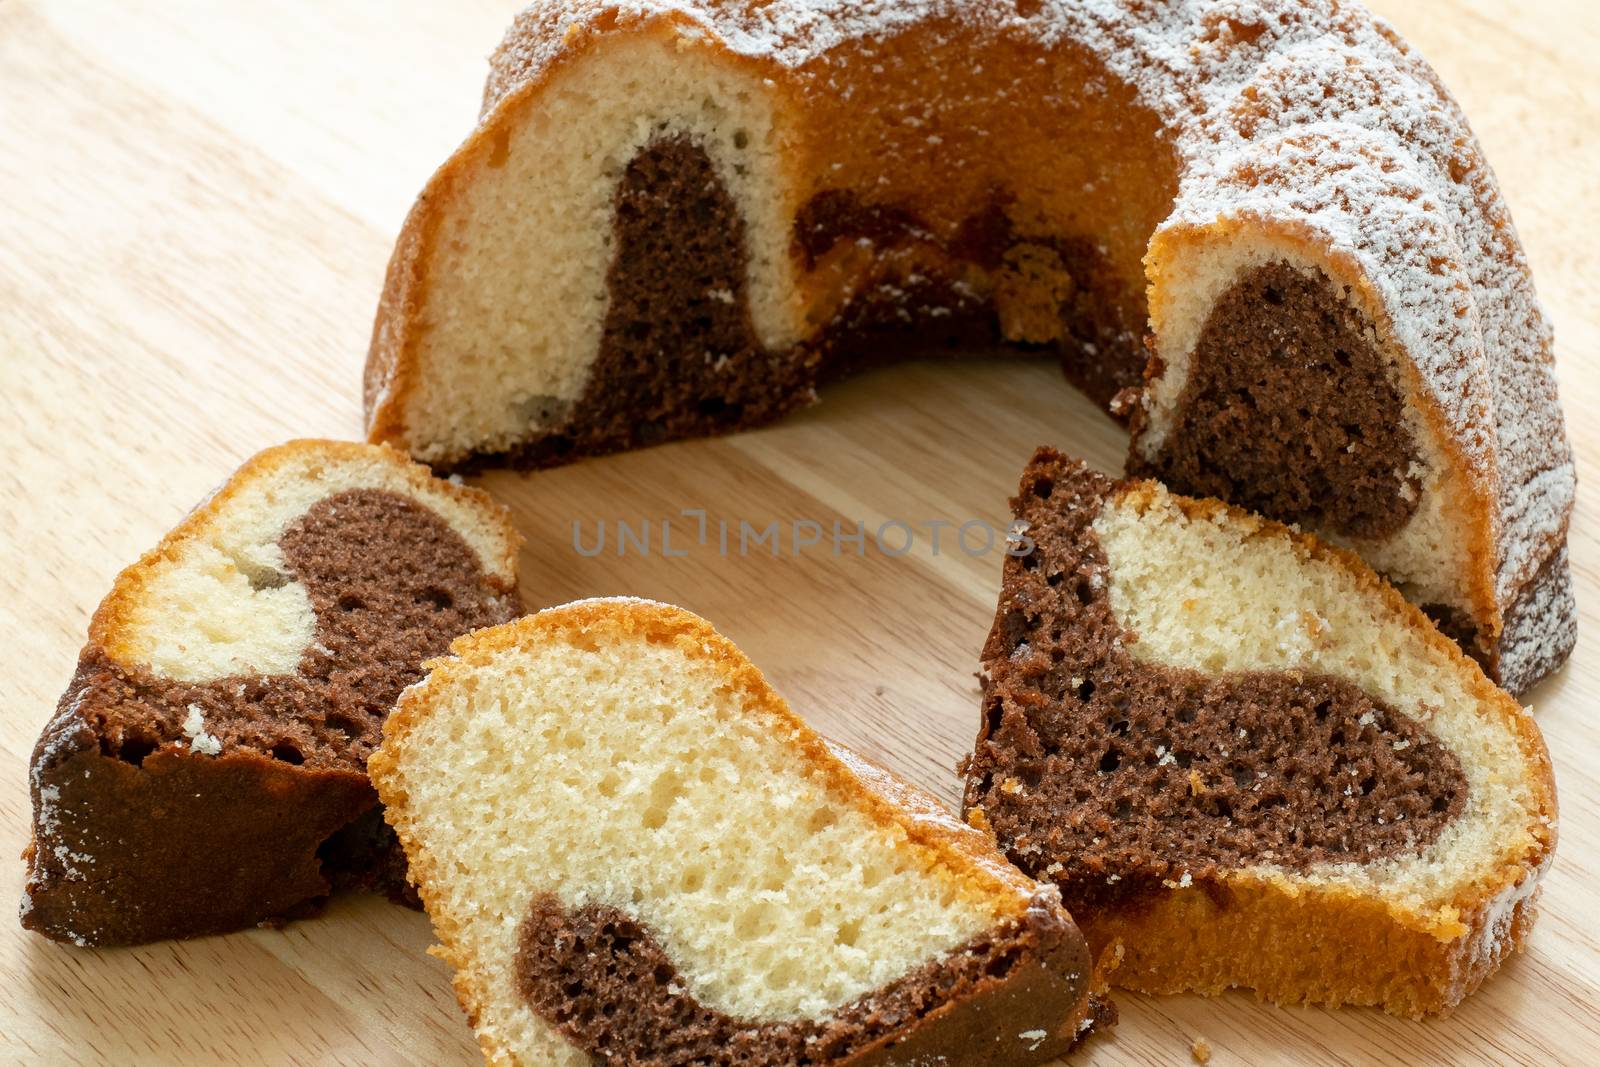 Traditional homemade marble cake. Sliced marble bundt cake on wooden table